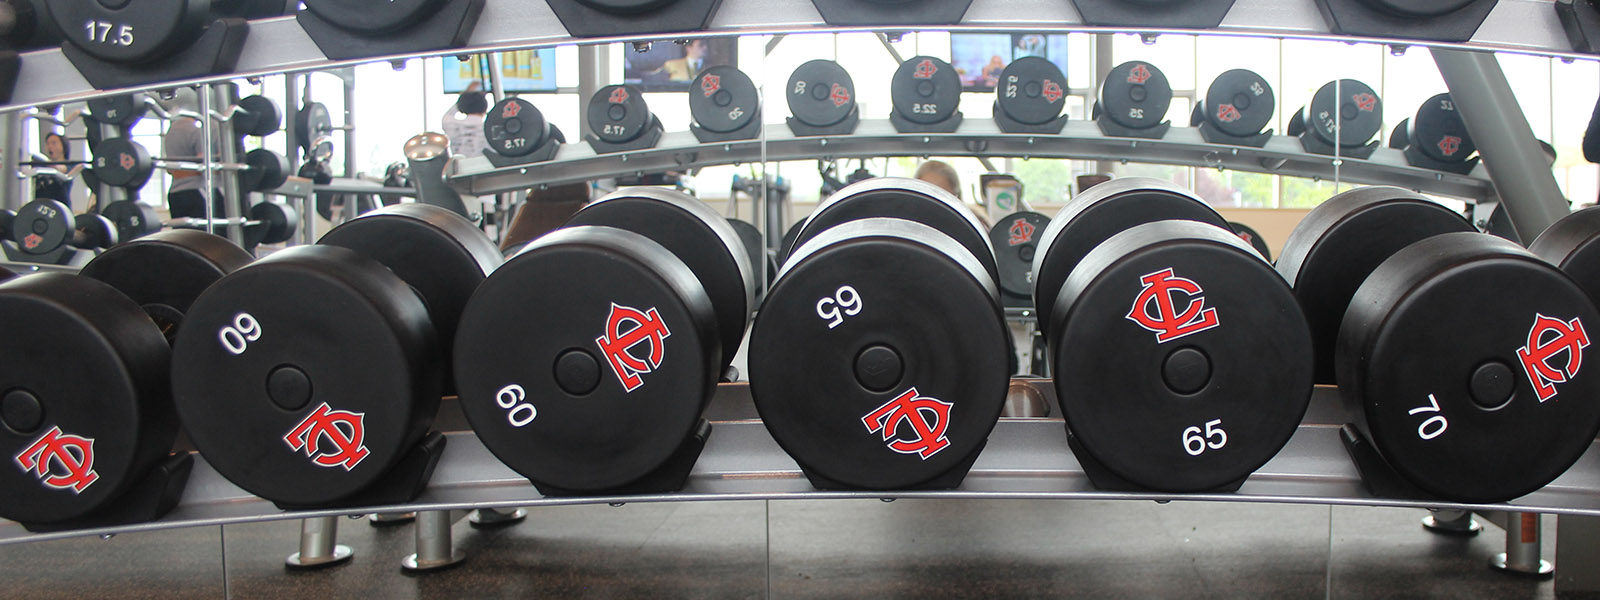 fitness center weights